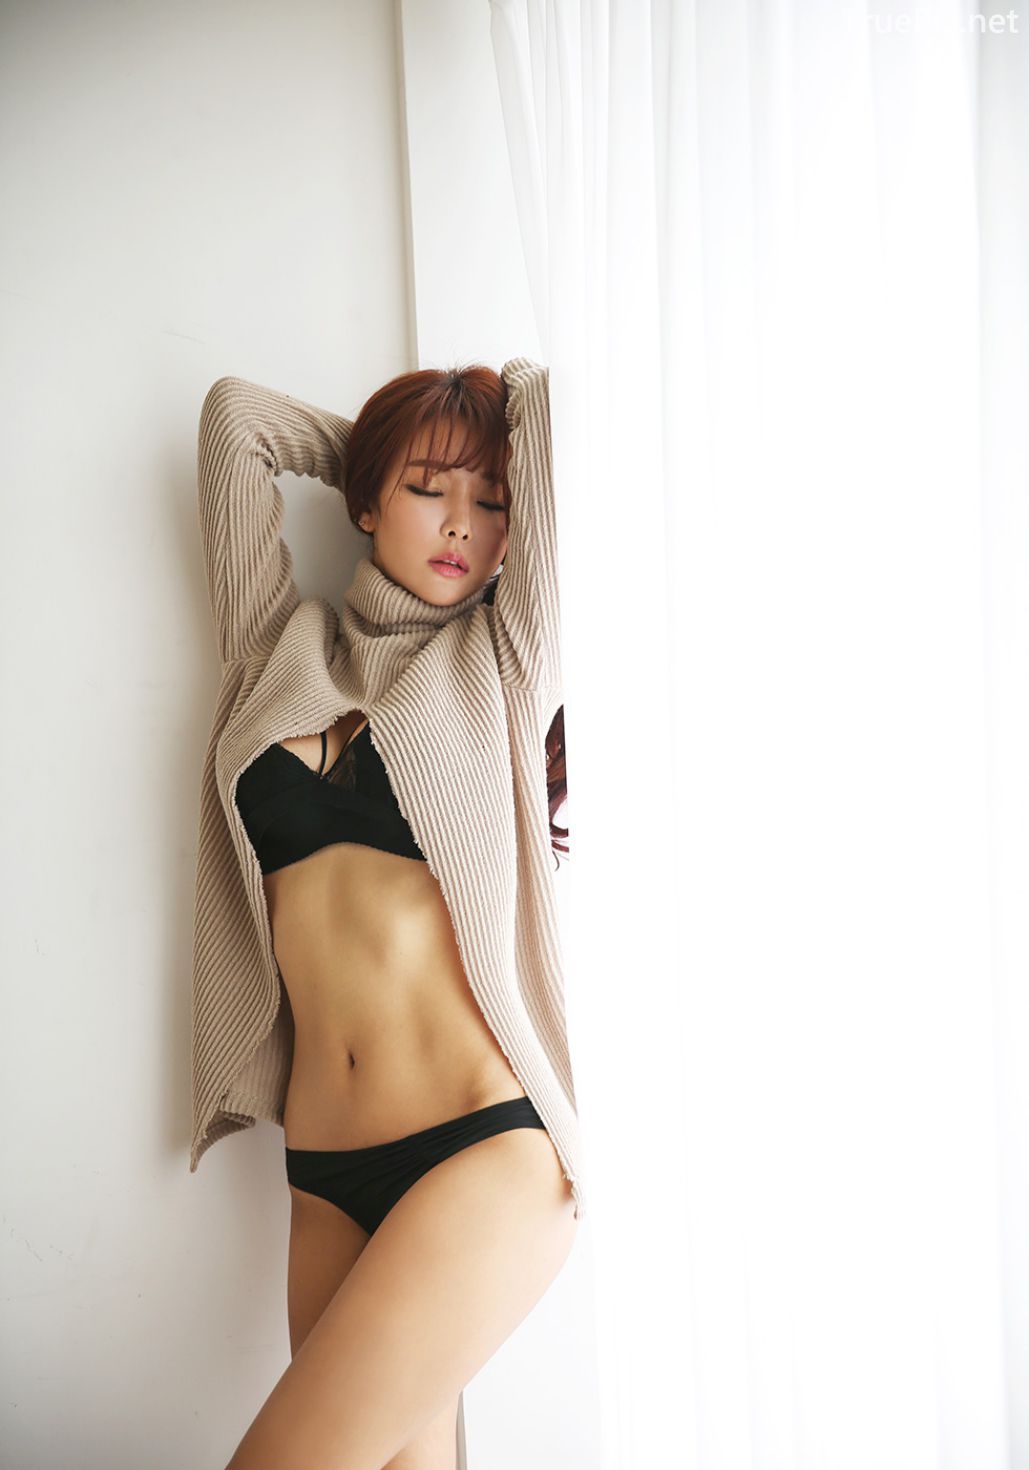 Korean Lingerie Lee Da Hee Model Tell Me What You Want To Do Page 3 Of 5